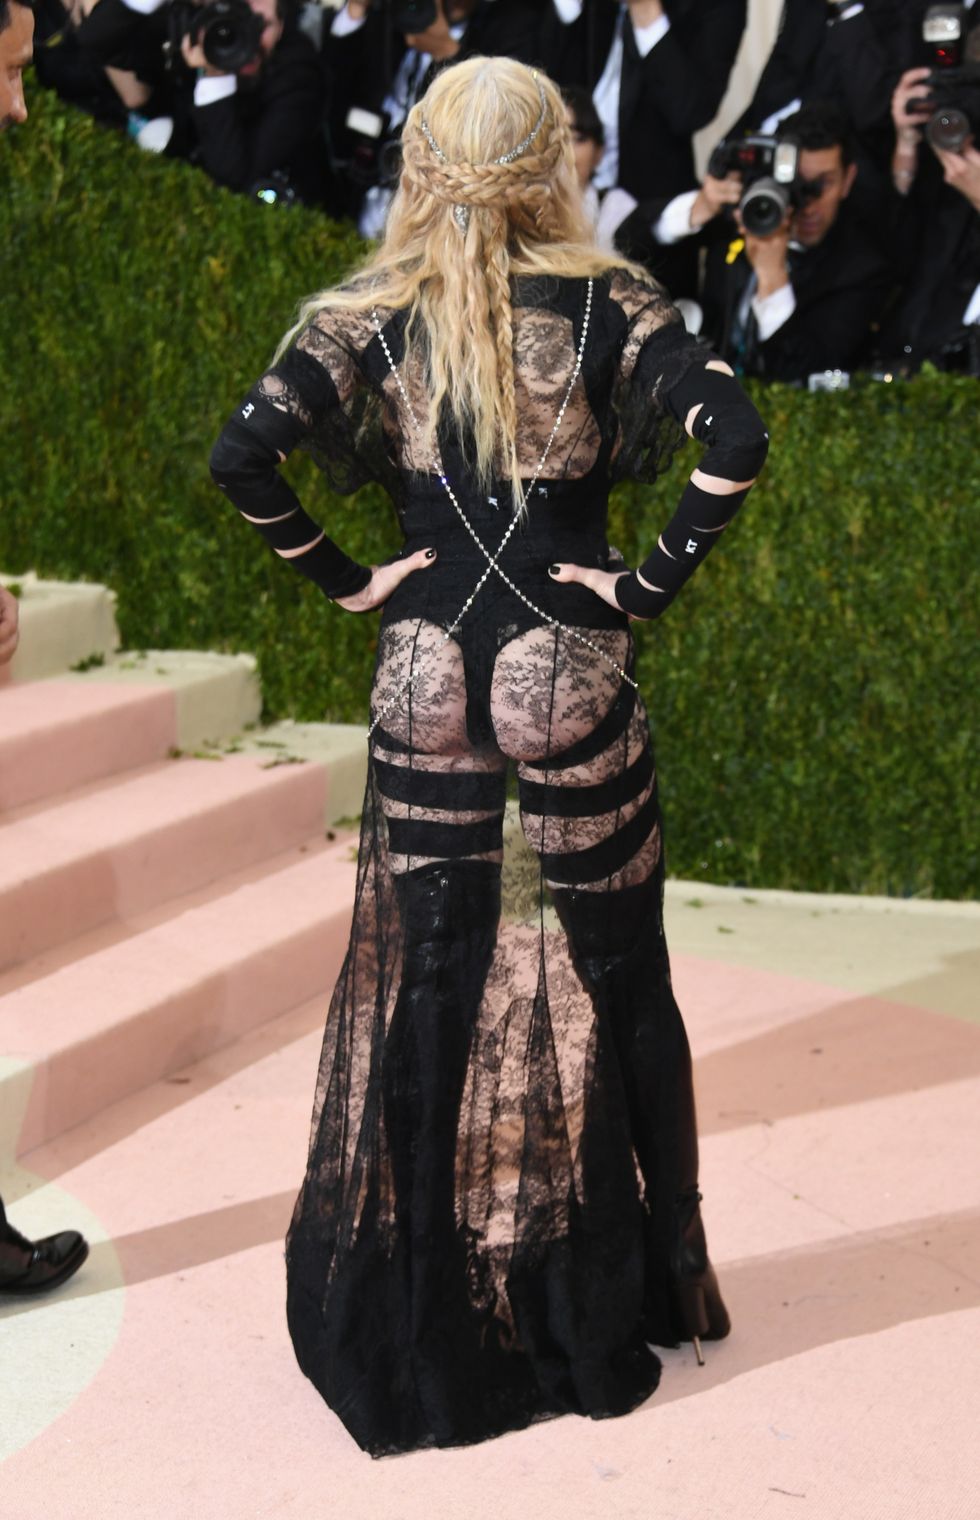 Madonna at the 2016 Met Ball wearing Givenchy